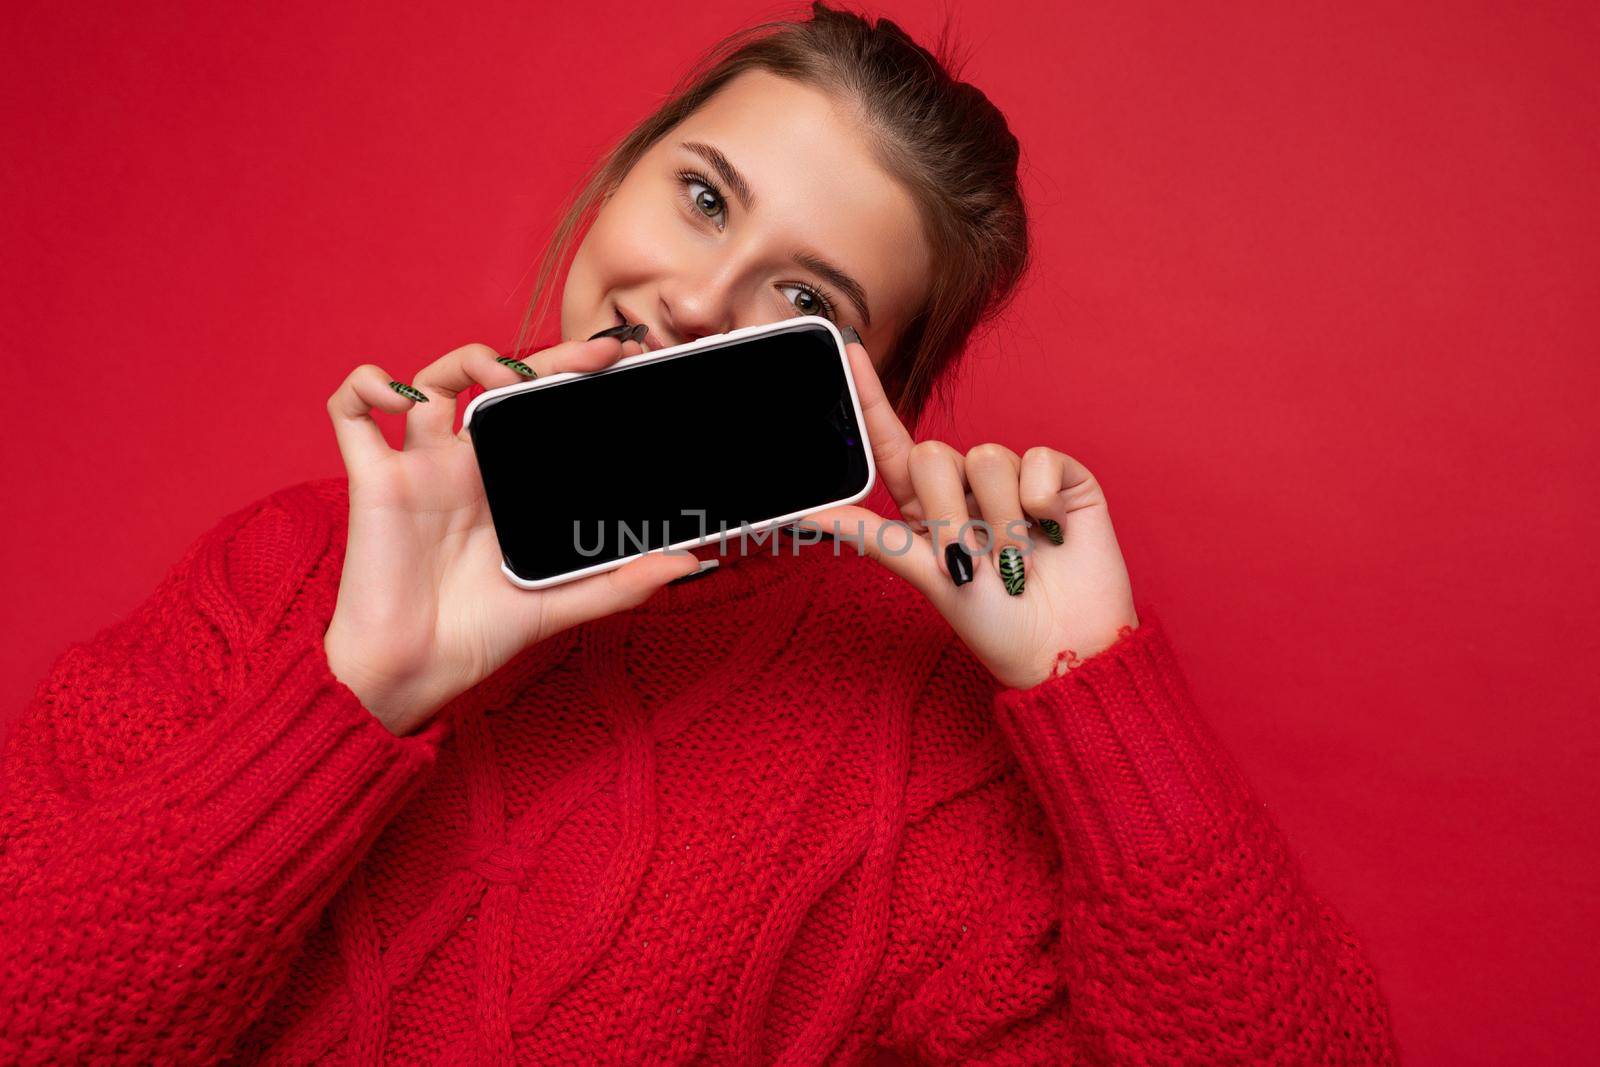 Photo of beautiful smiling young woman good looking wearing casual stylish outfit standing isolated on background with copy space holding smartphone showing phone in hand with empty screen display for mockup looking at camera.